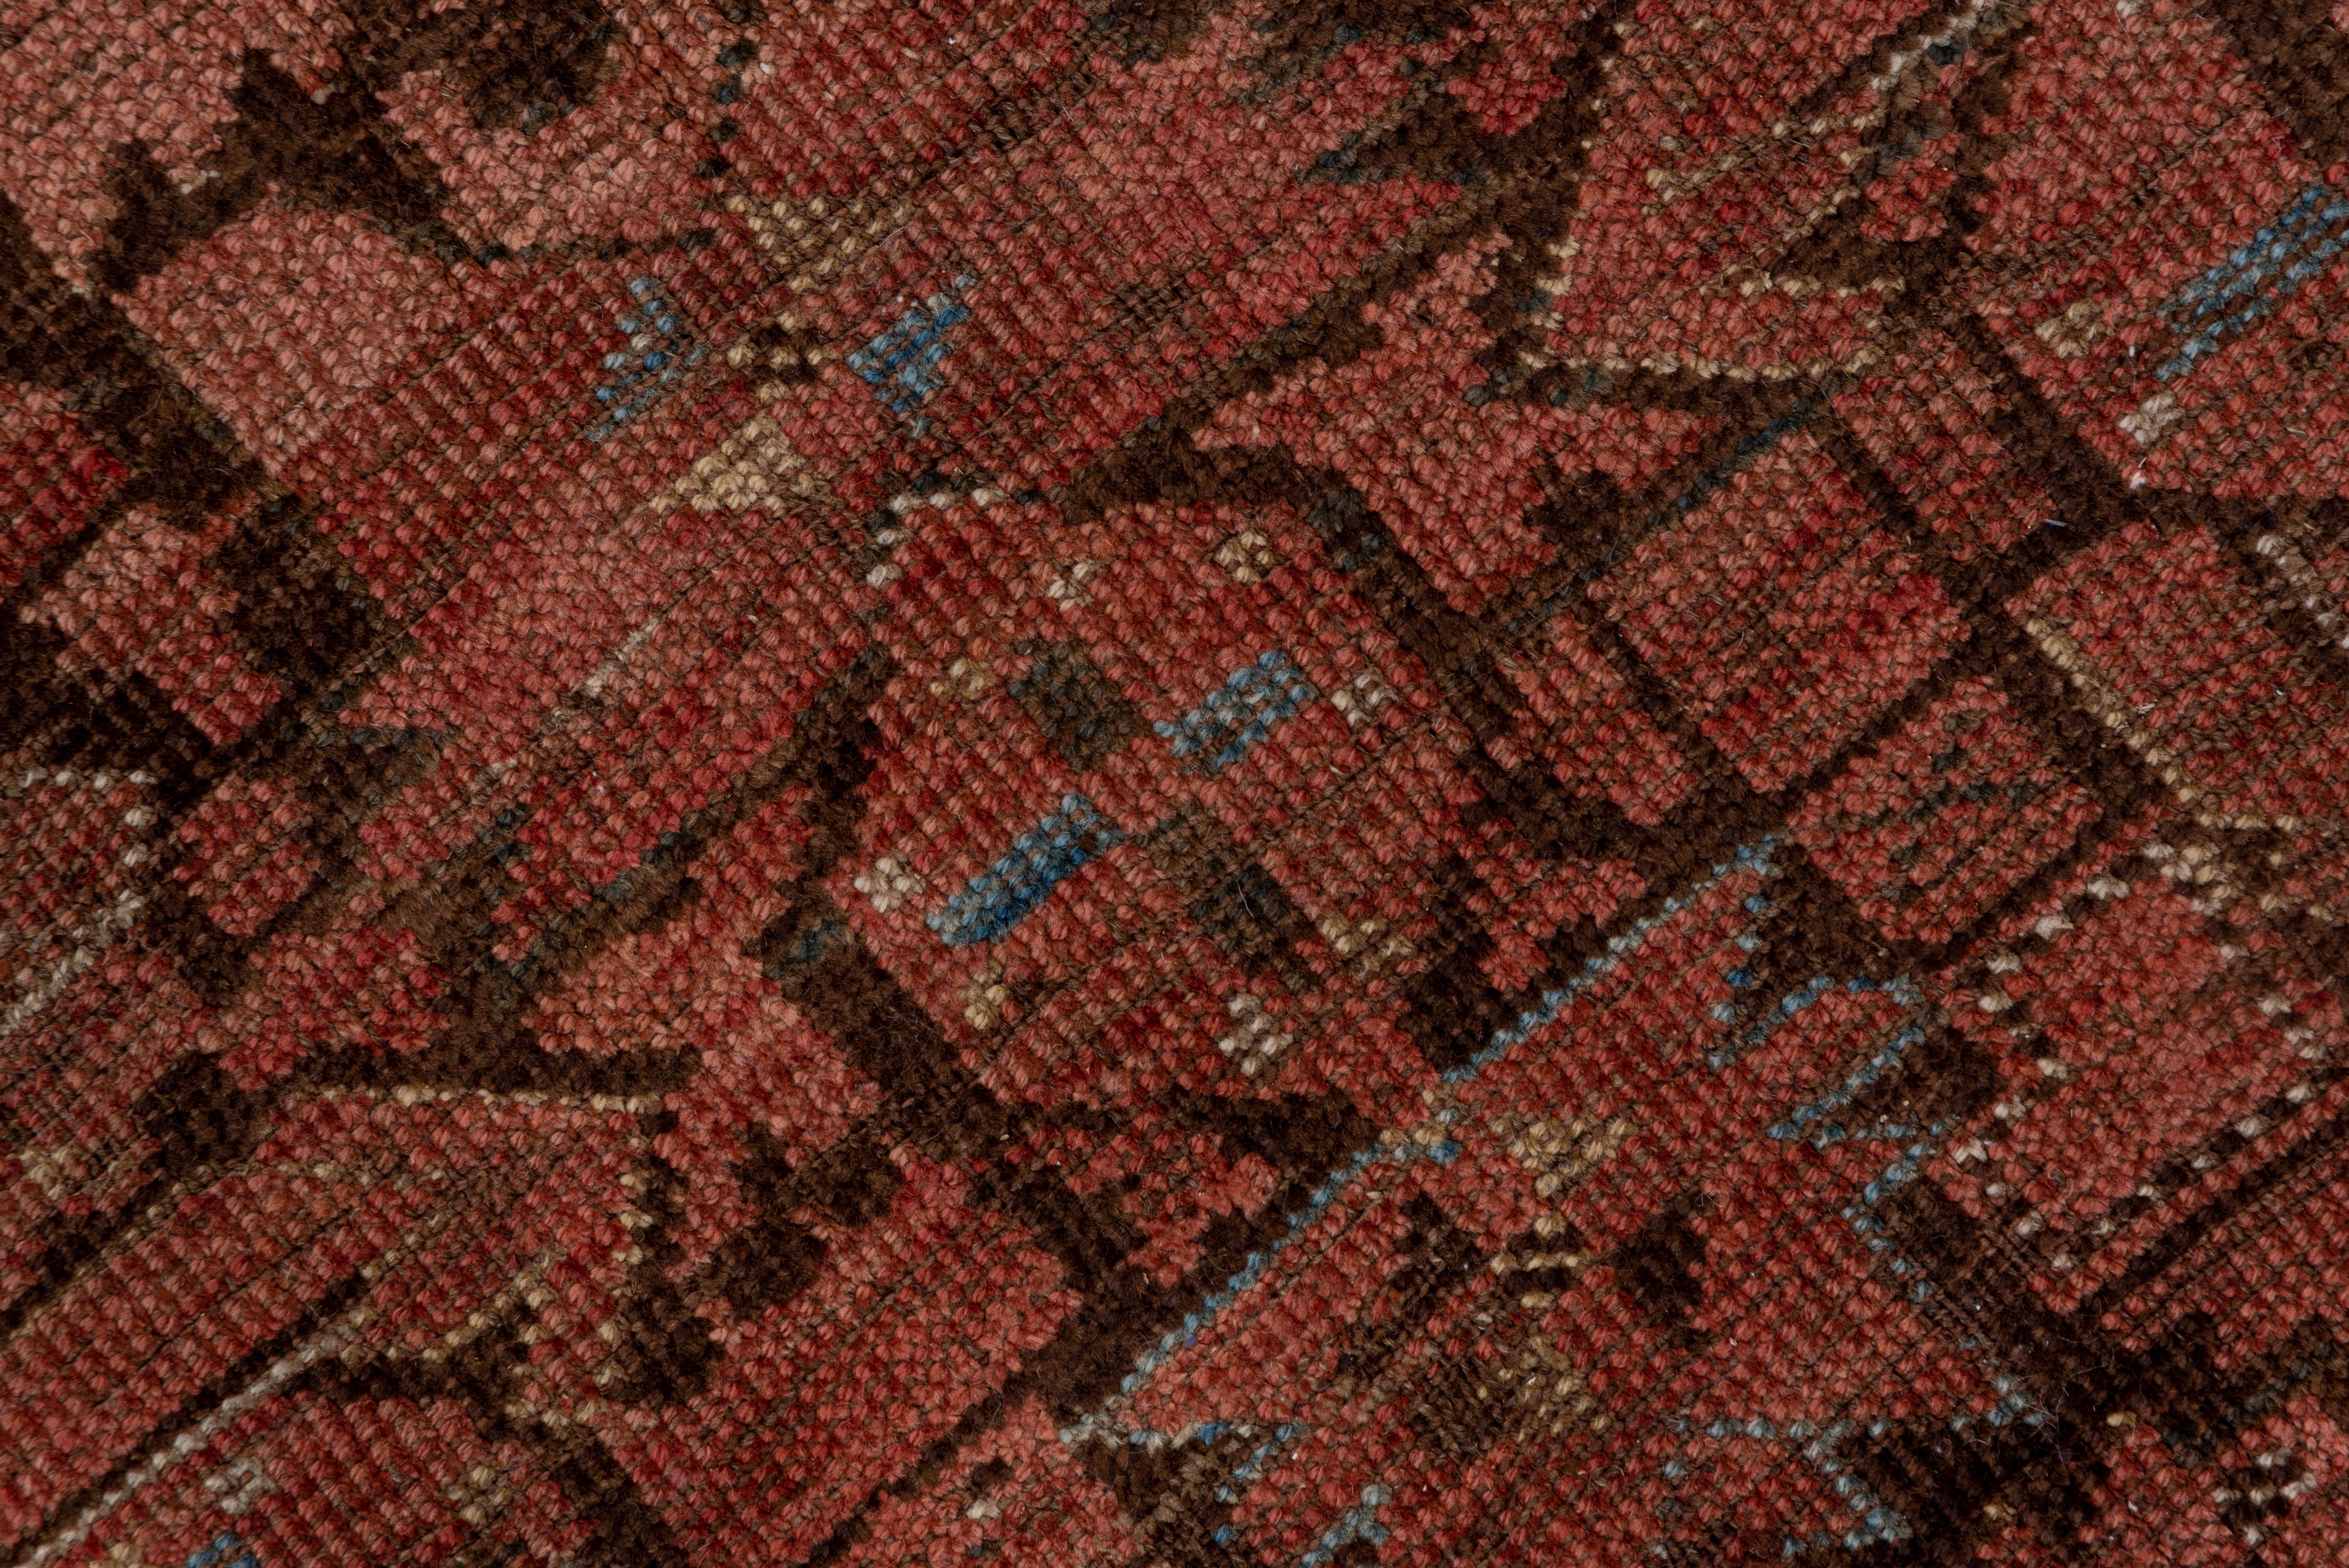 The dark red-brown field on this gallery carpet is closely covered by a Turkmen tribal geometric version of the classic Persian Herati design, overlaid by small octagonal motives. The borders show octagons and eight-fold divided squares. The red is